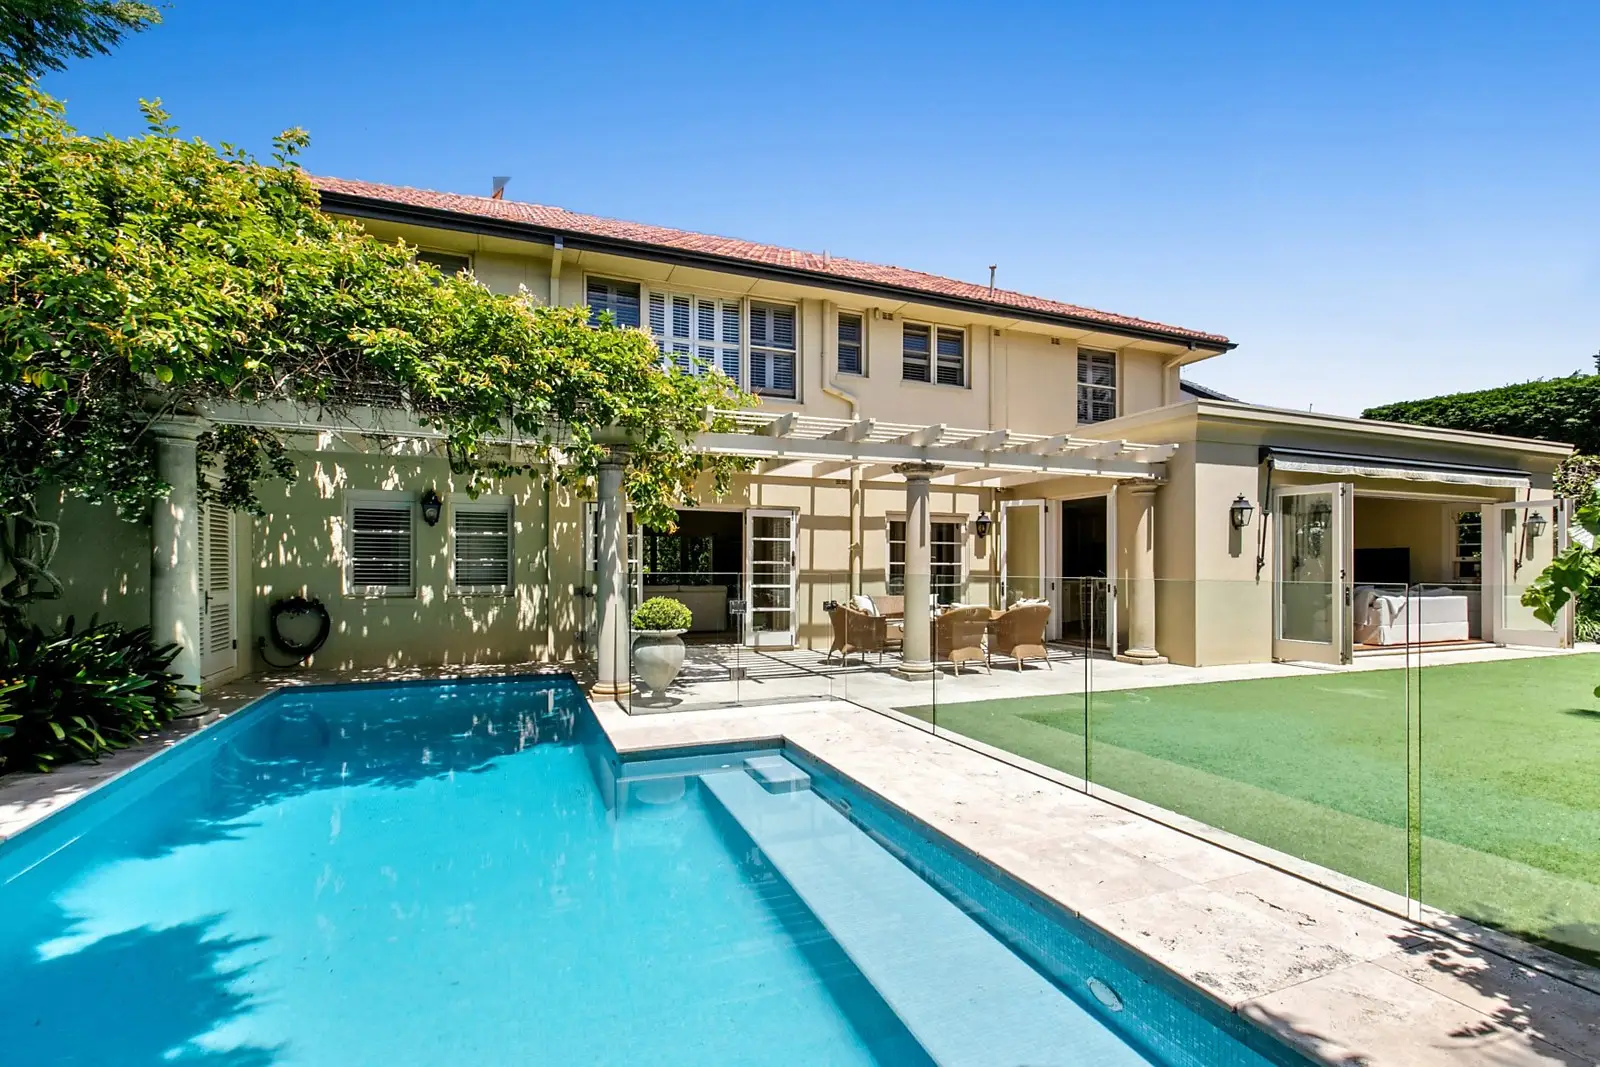 Photo #1: 59 Captain Pipers Road, Vaucluse - Sold by Sydney Sotheby's International Realty